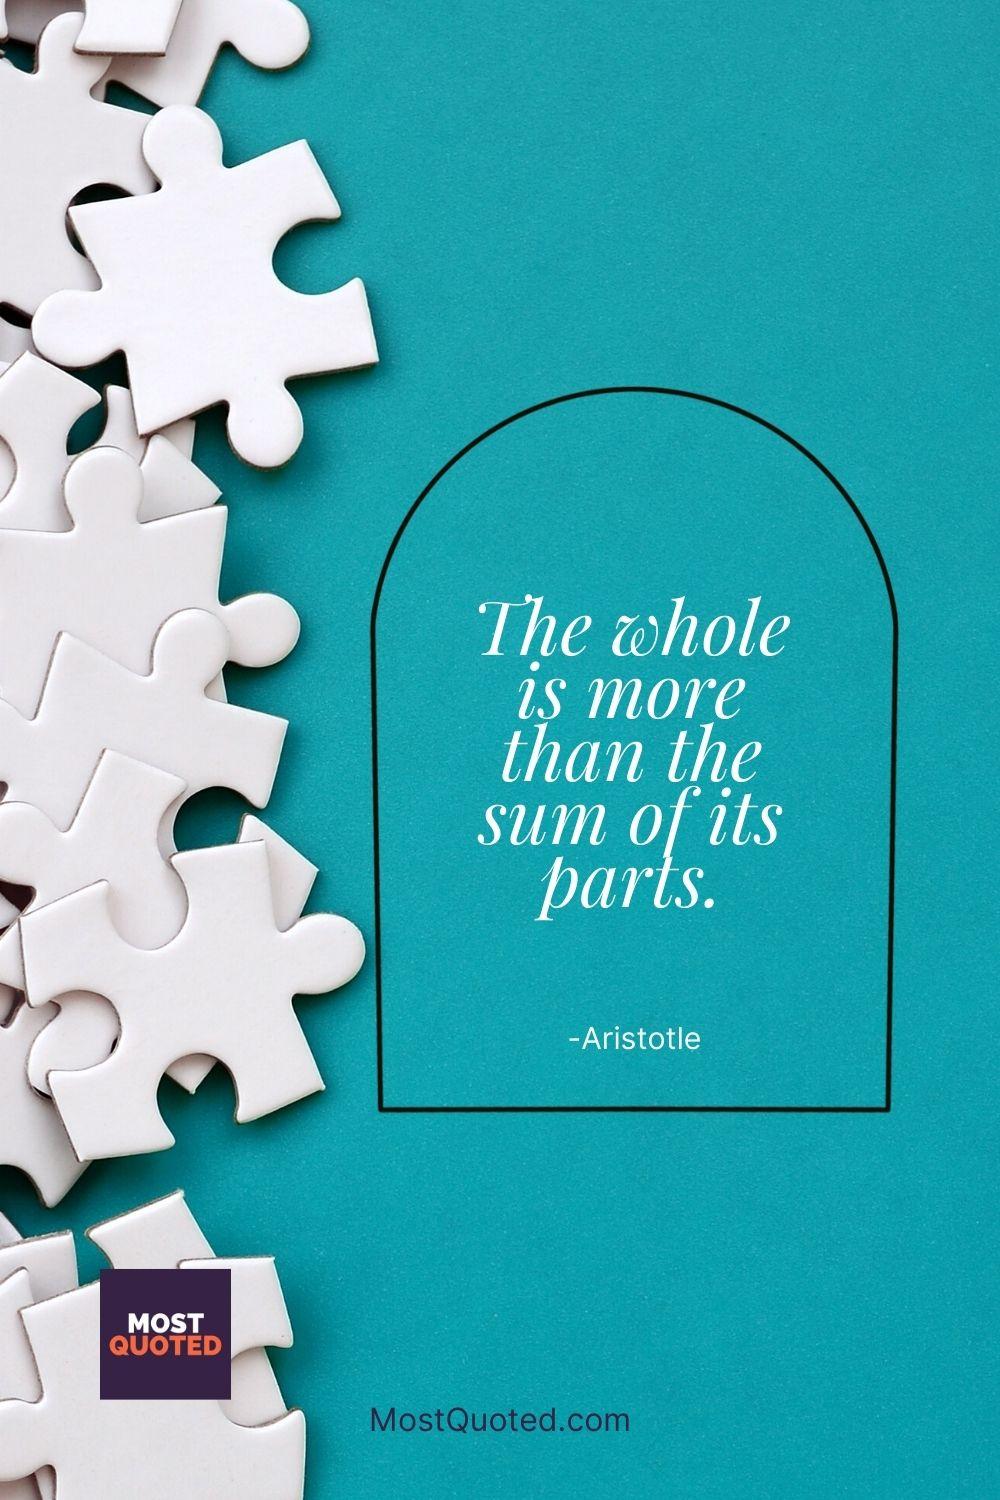 The whole is more than the sum of its parts. - Aristotle